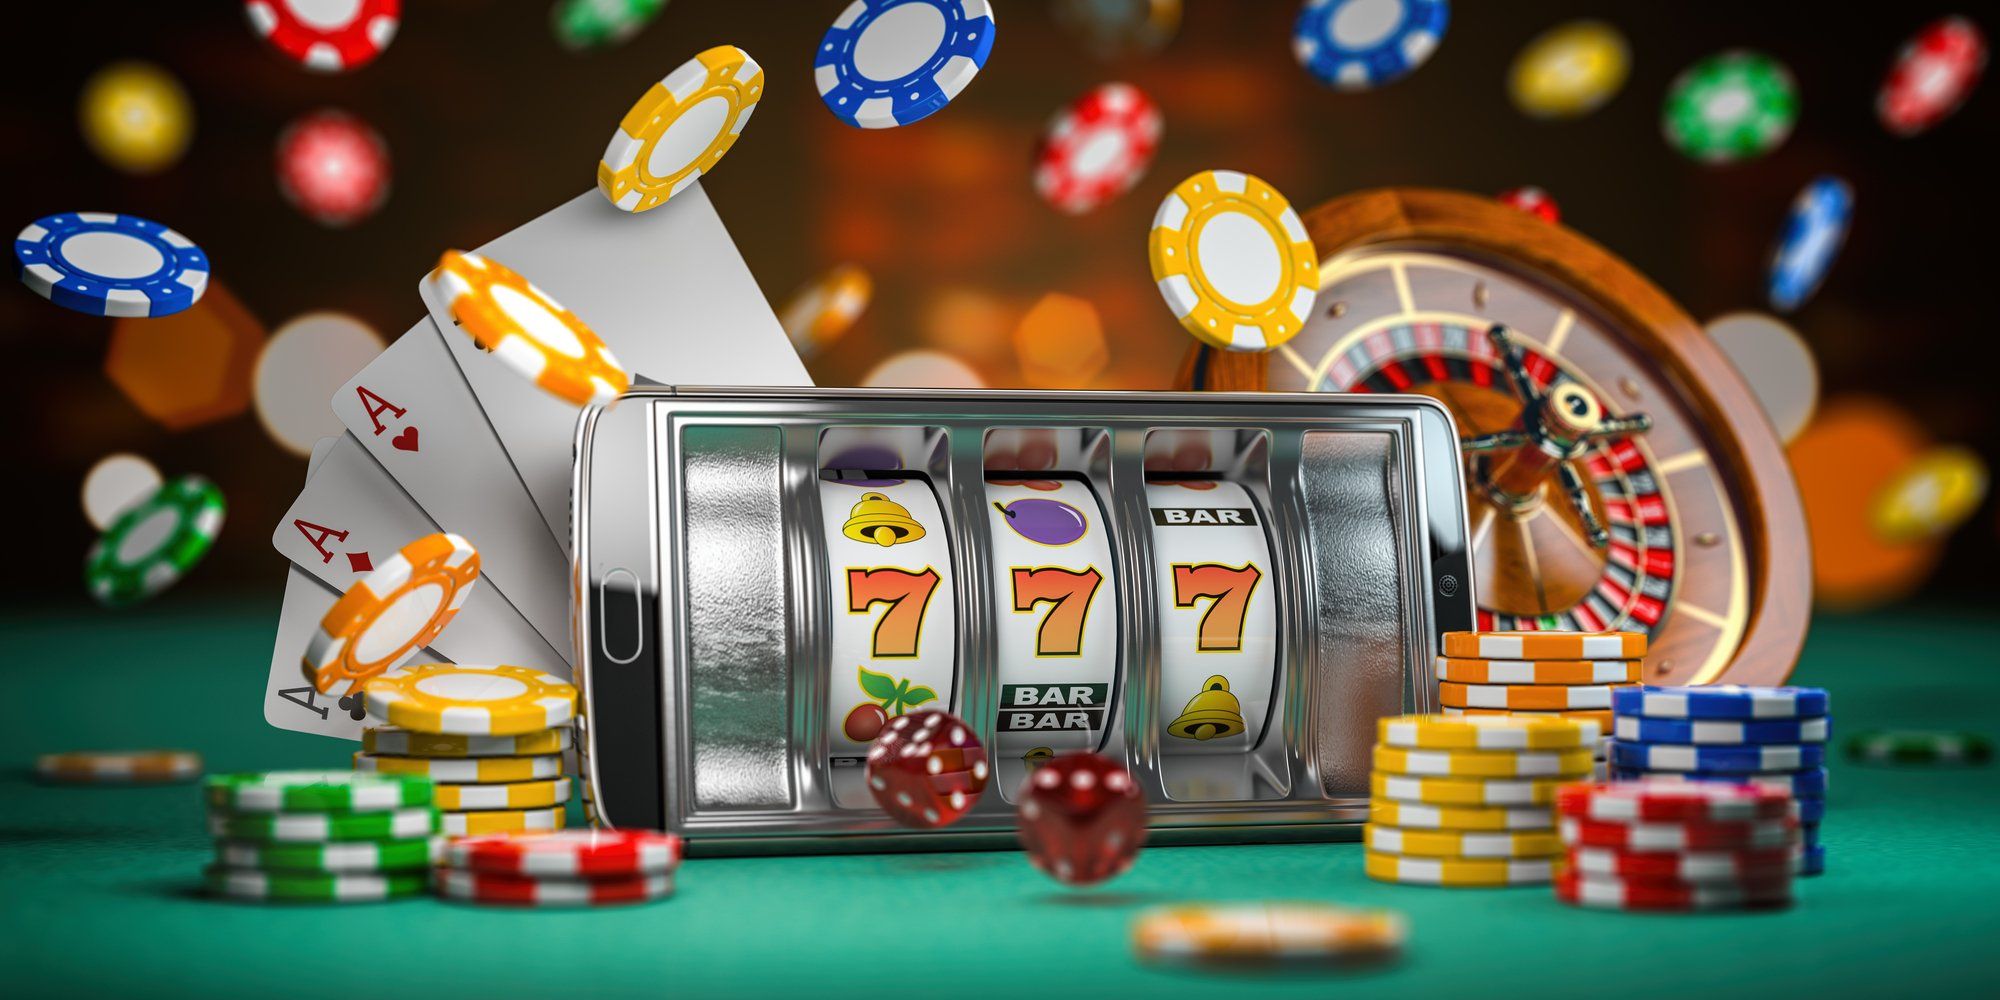 Join The Fun And Claim Huge Casino Bonuses At Bet365